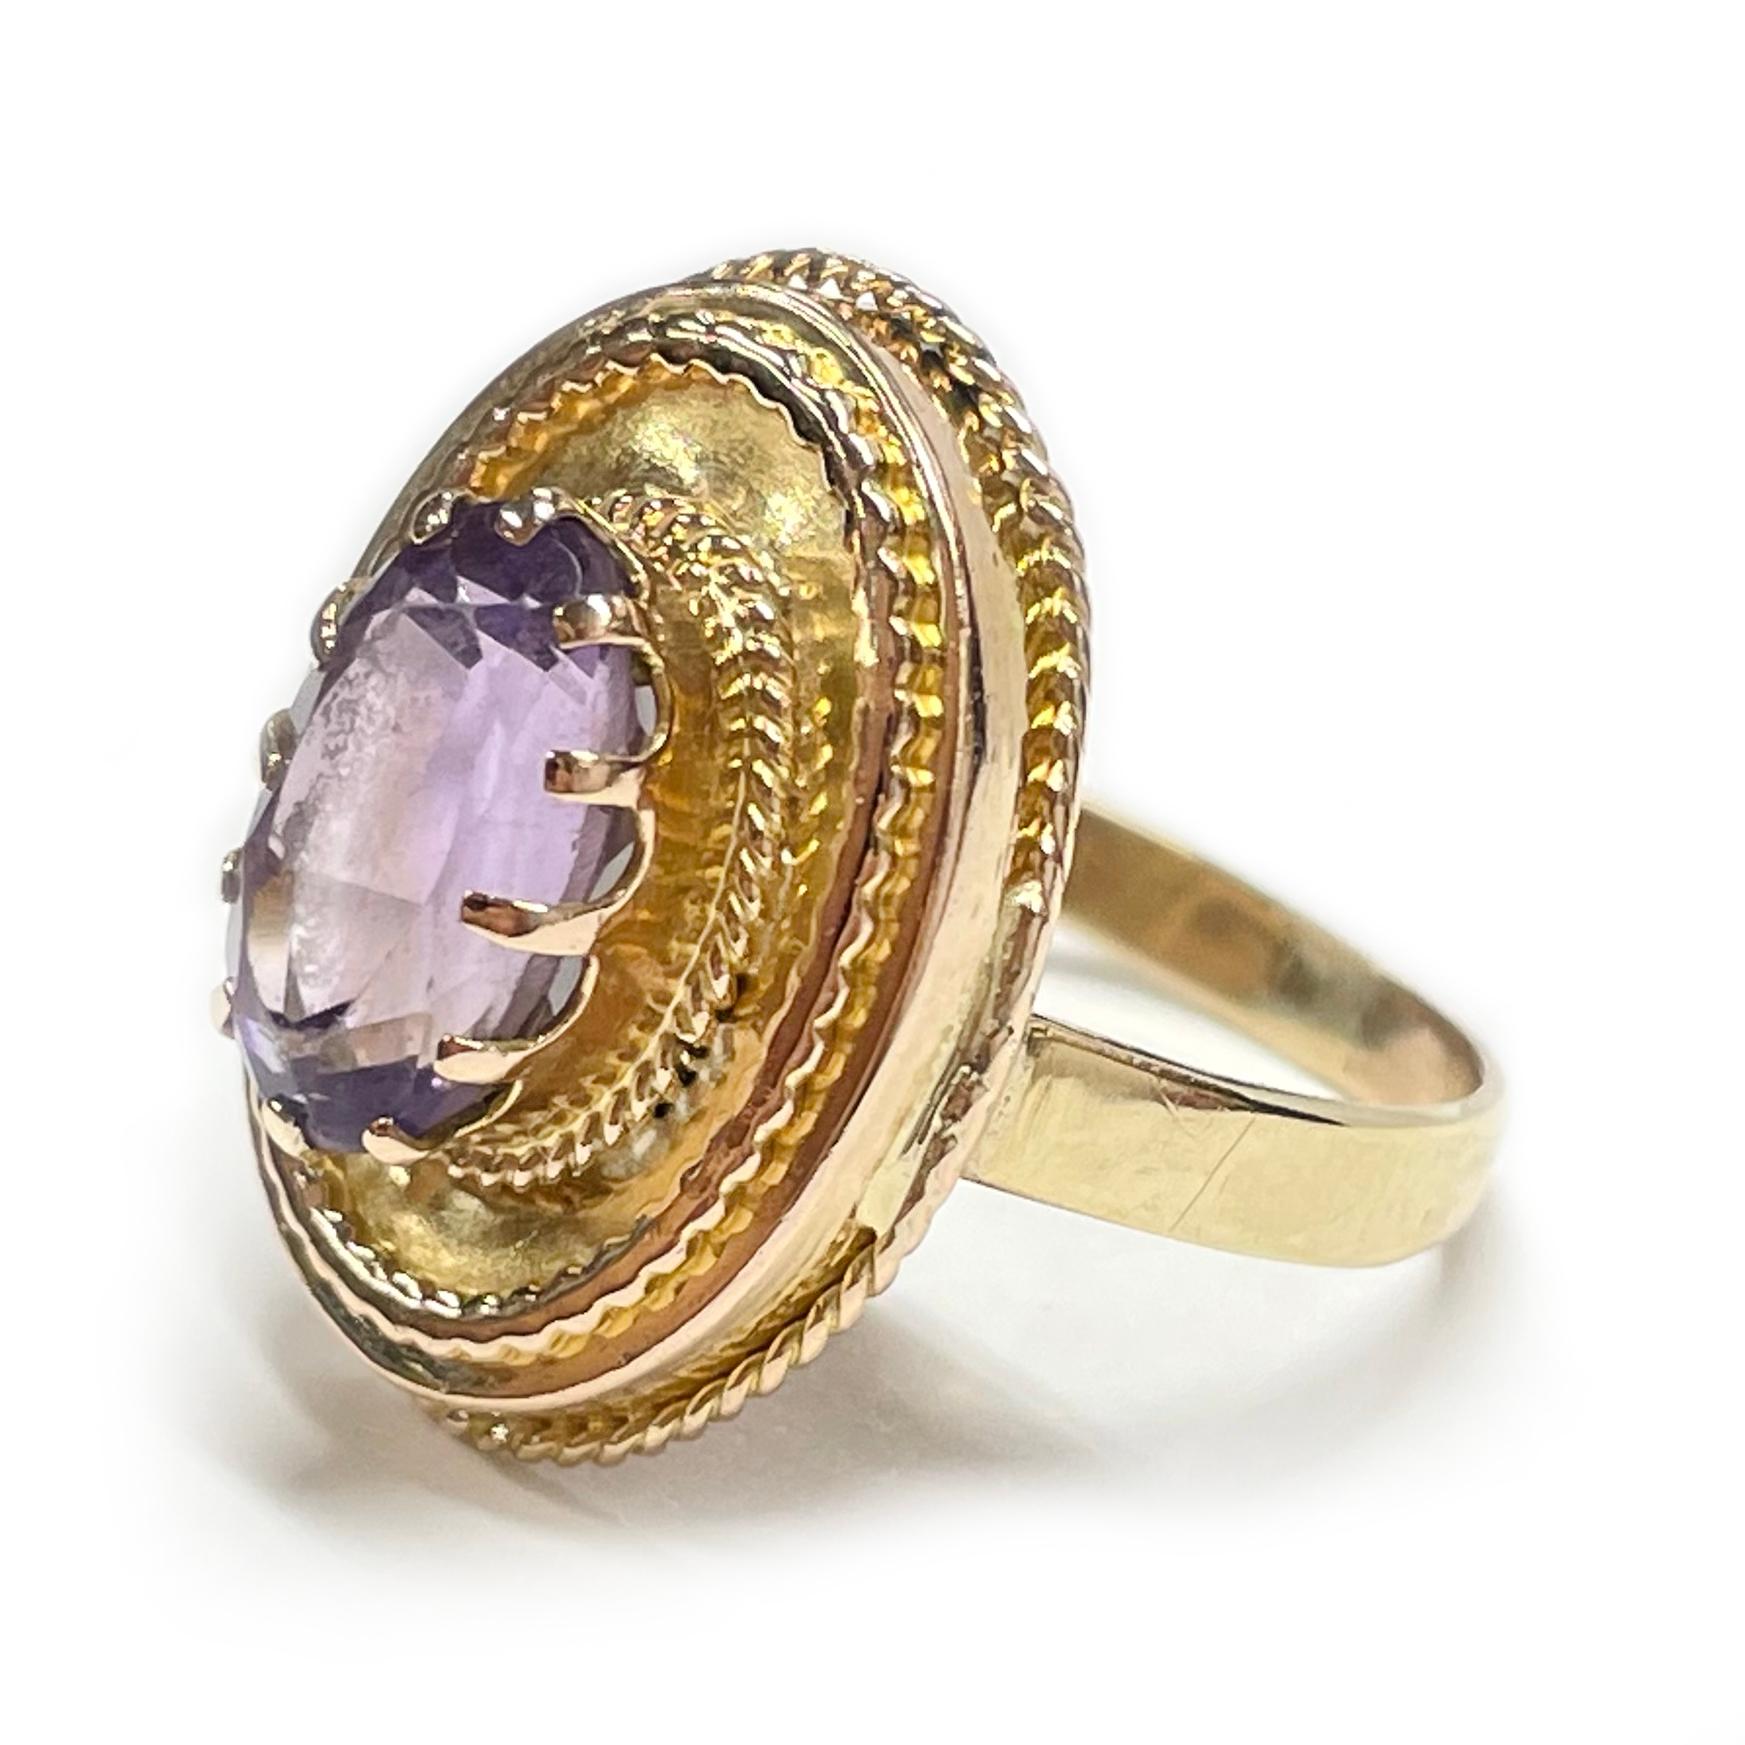 14 Karat Rose Gold Amethyst Cocktail Ring. The ring features an oval-cut 8 x 10mm Amethyst with textured wire gold details. The medium color gemstone is prong-set with twelve prongs. The Amethyst has light scuffs but is in good vintage condition.